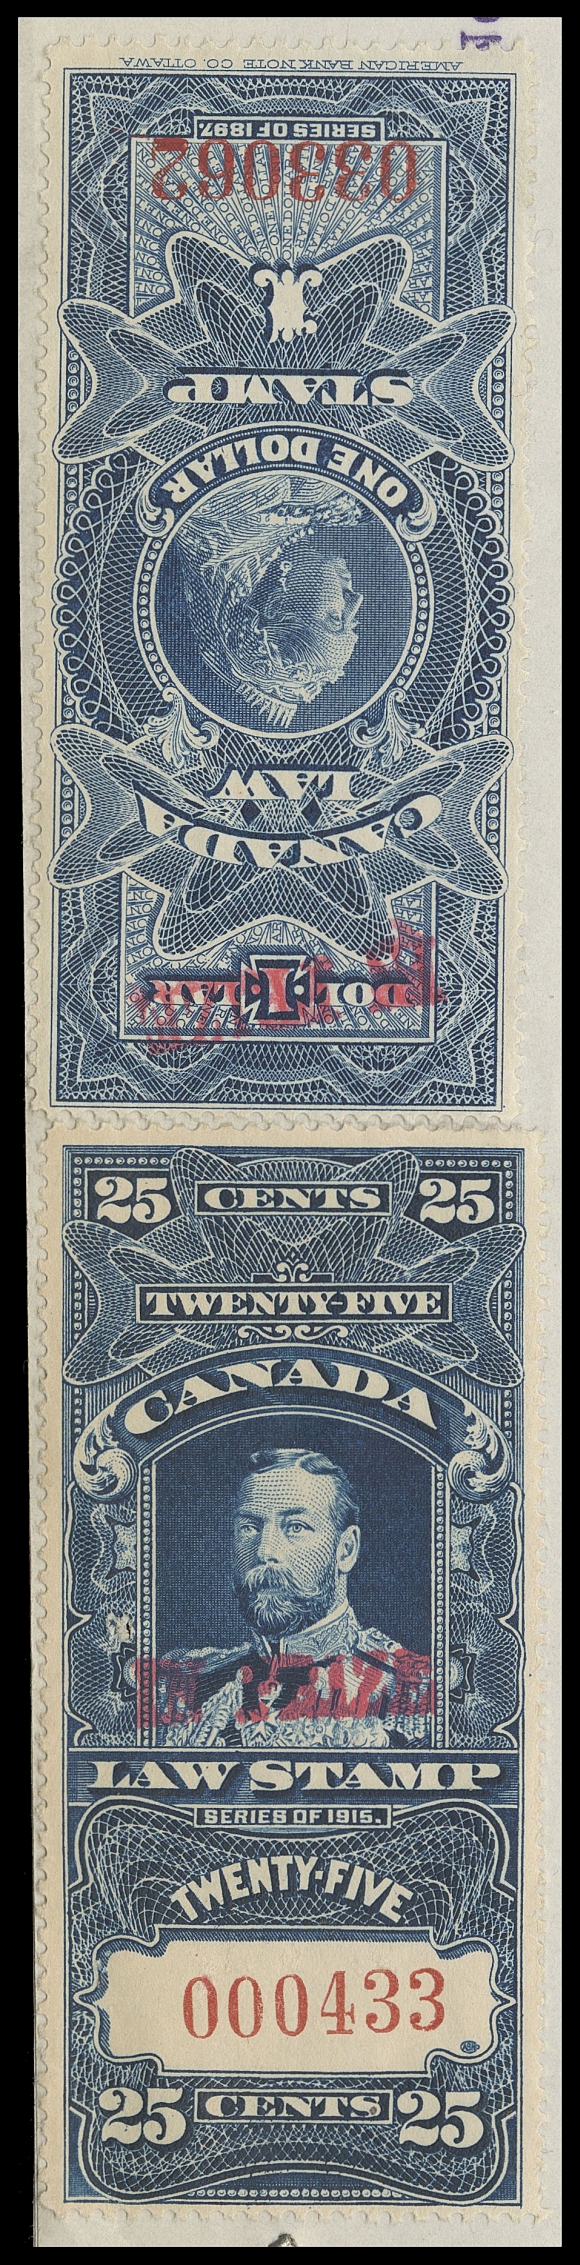 CANADA REVENUES (FEDERAL)  FSC30, 31,Two singles handstamped "IN PRIZE" in red, serial numbers "033062" and "000433", both in choice condition, quite well centered and affixed uncancelled to first page of "The Leonor" three-page Affidavit of "A.P. Luxton" document, which details steps taken for the case, handstamped Exchequer Court IN PRIZE with manuscript "17/10/16" and initialed "O.B." (Oswald Barton), a significant and very attractive document, VF (Cat. value for stamps)